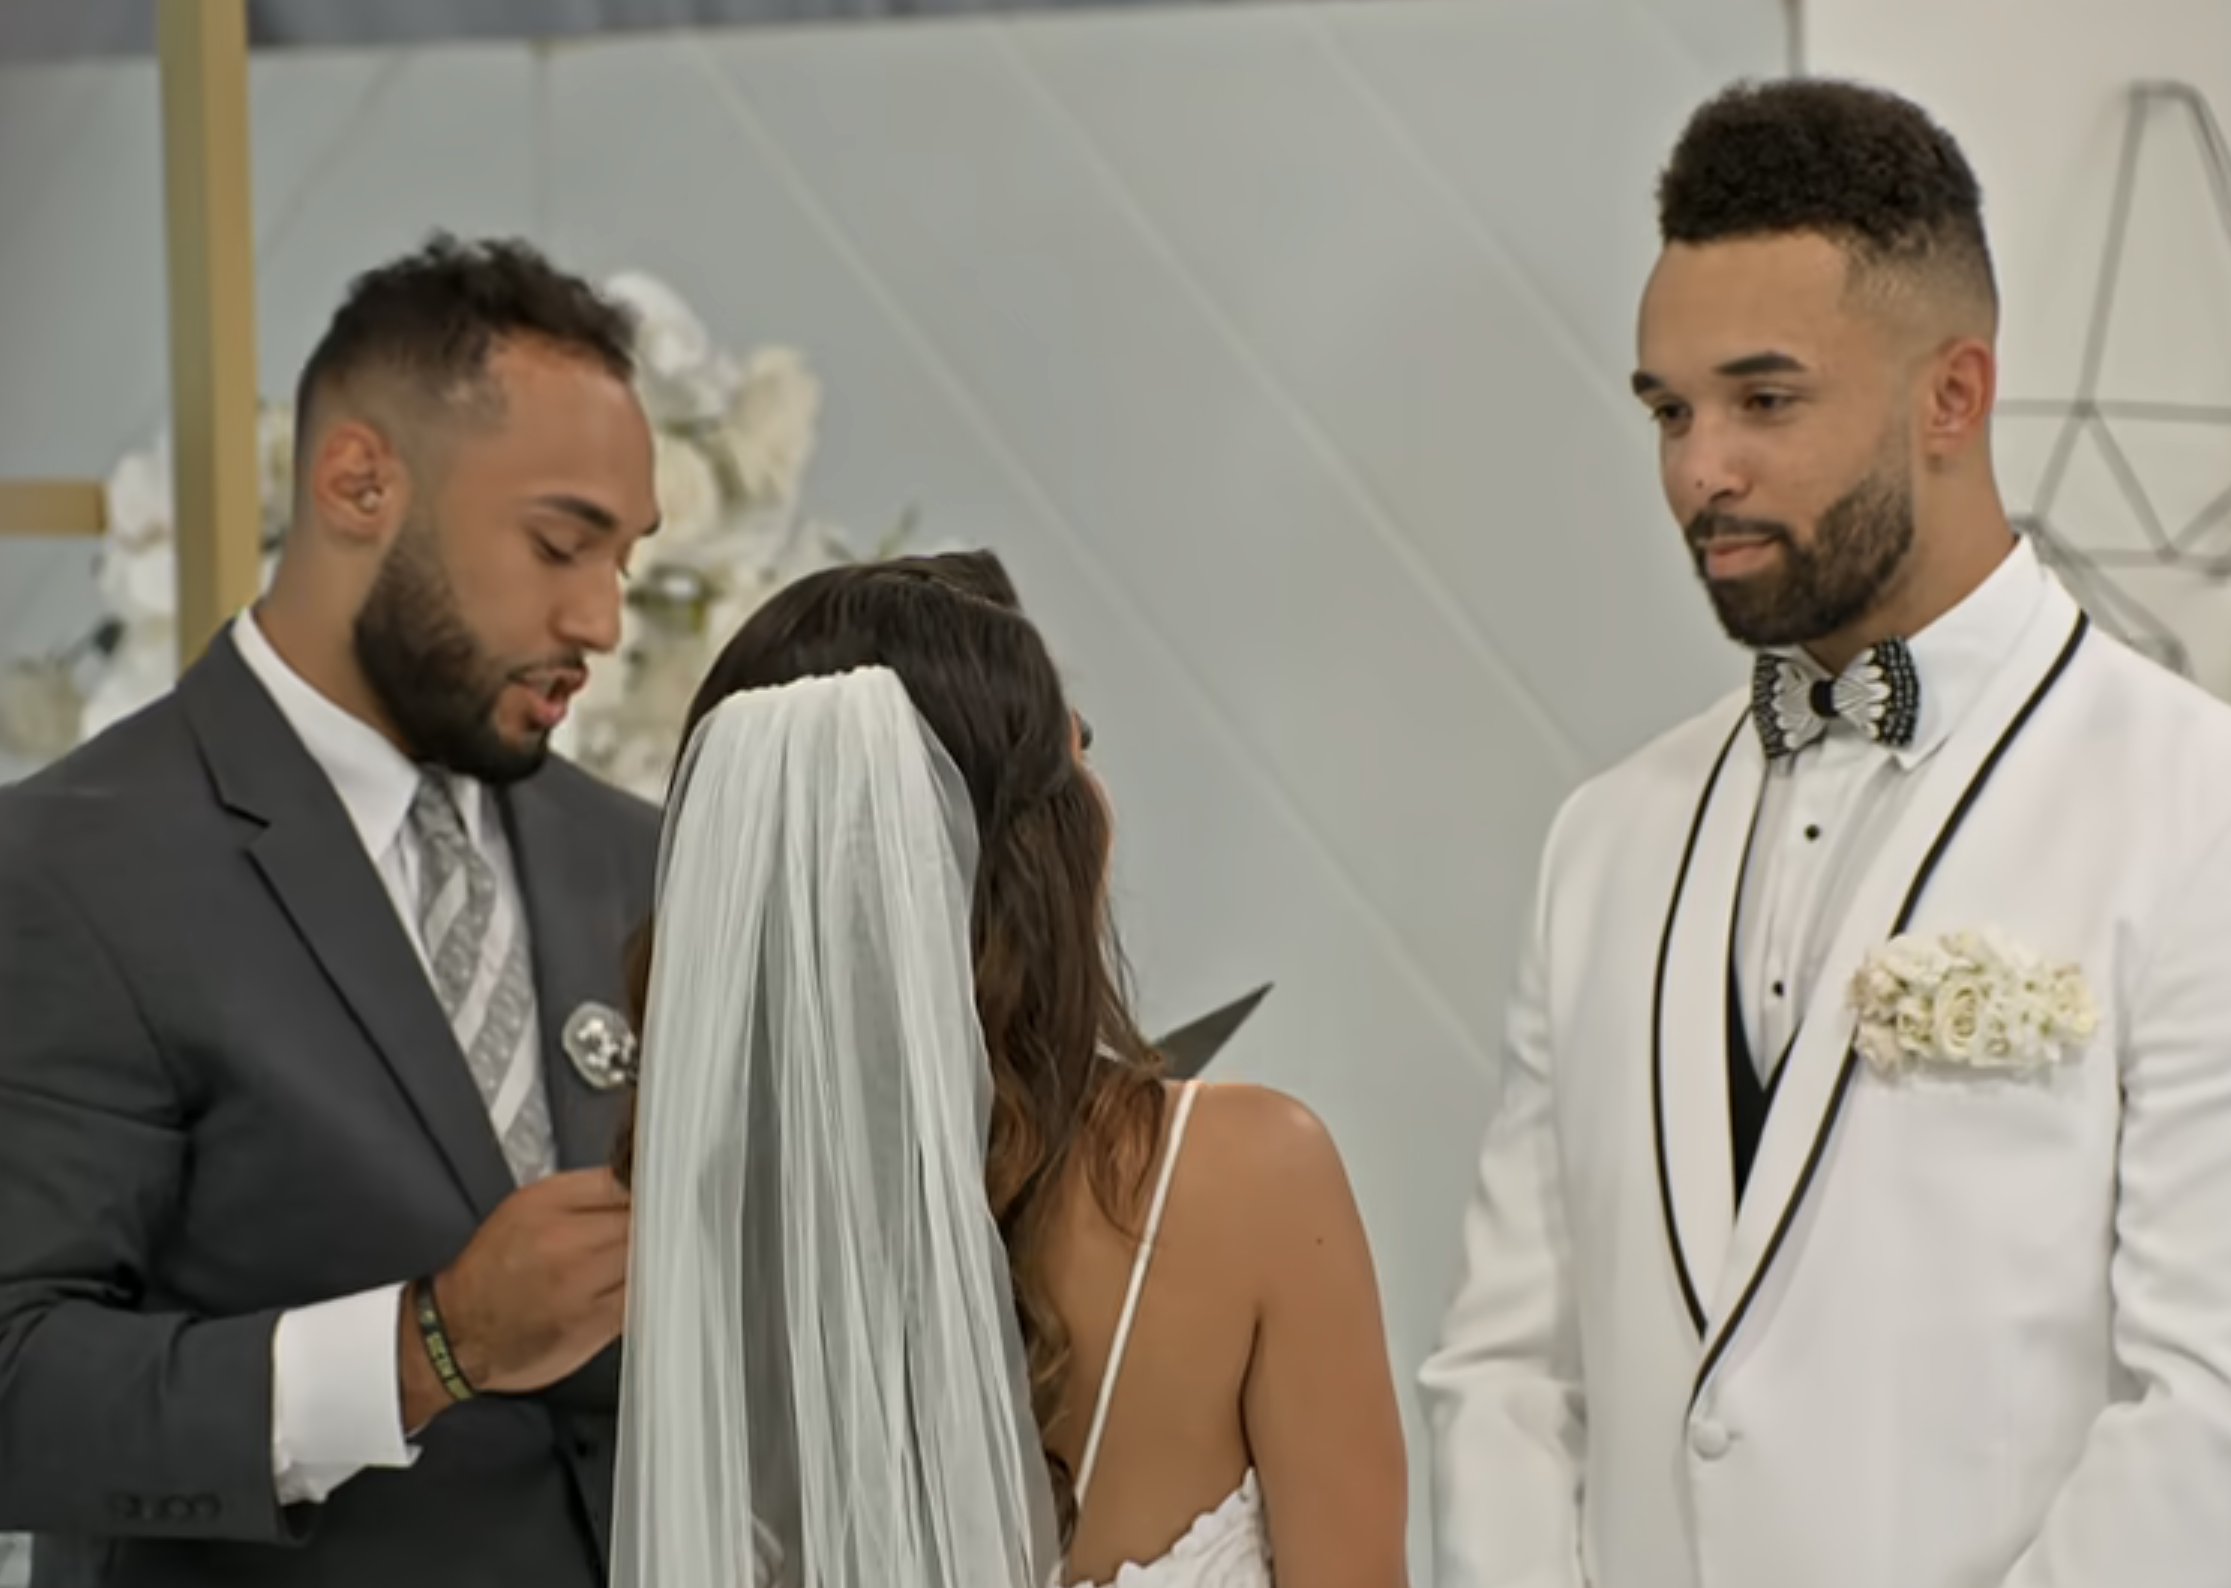 Two contestants on the show getting married